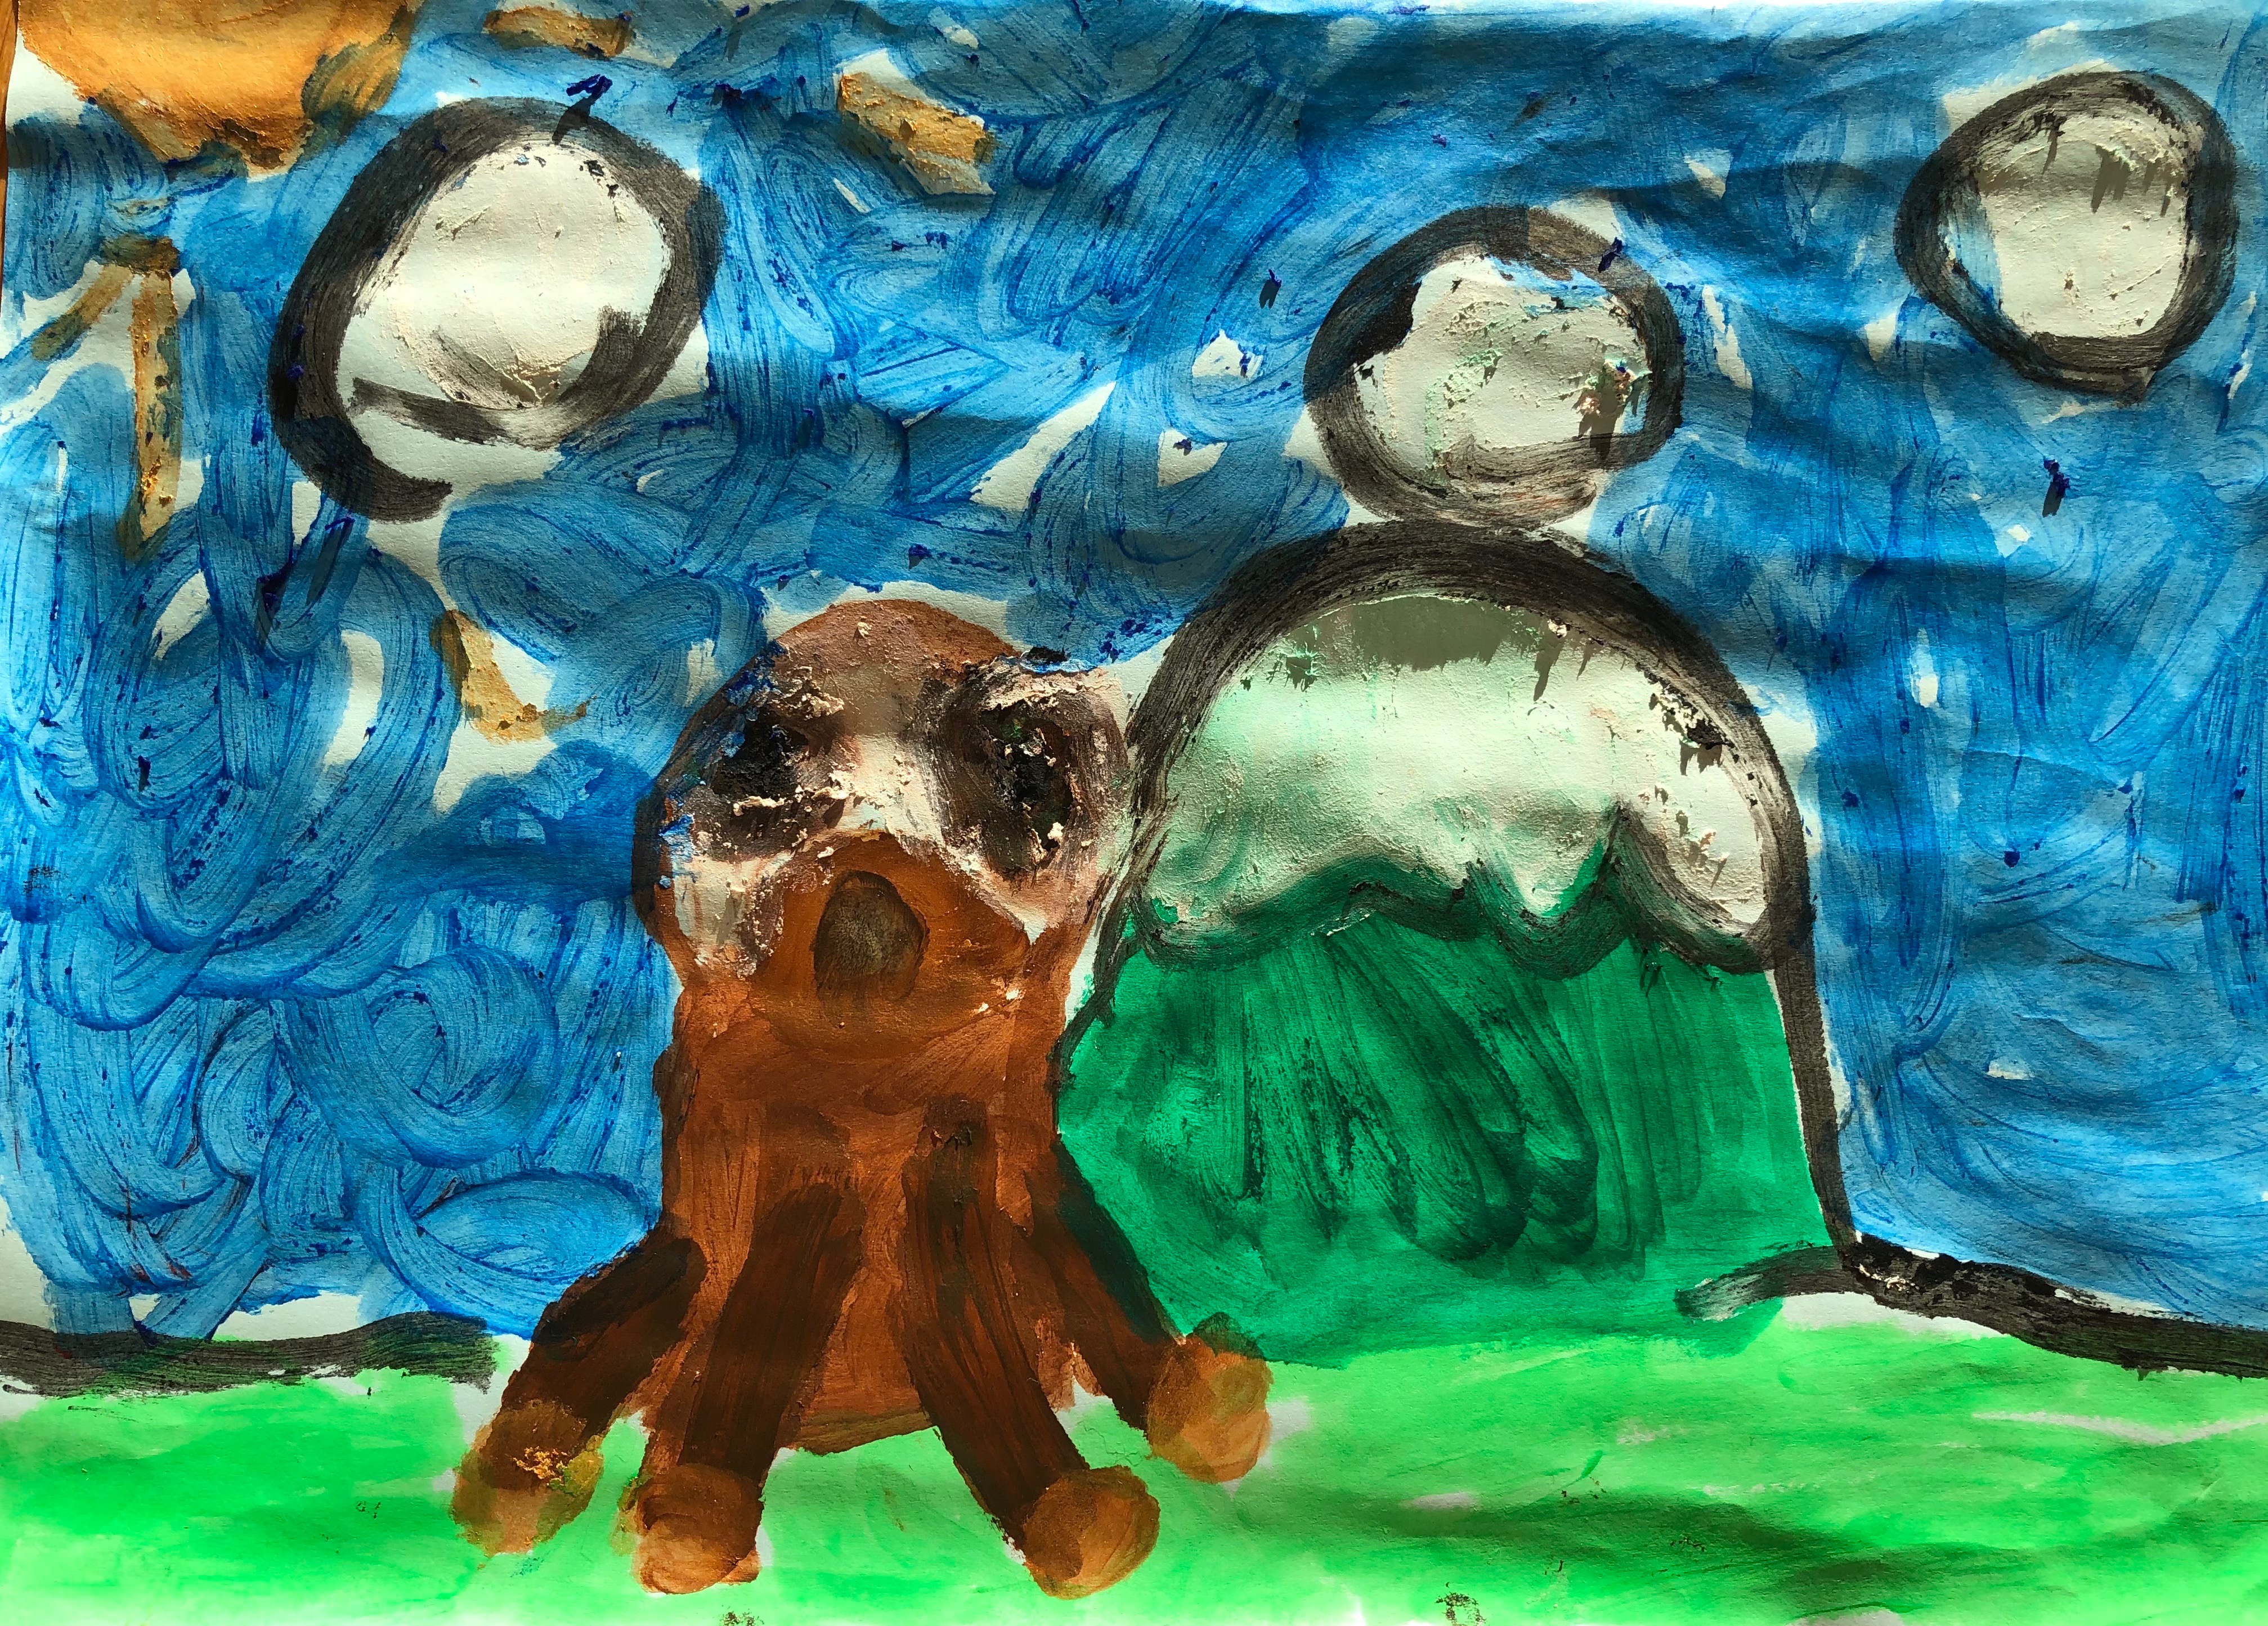 'Sloth by Croagh Patrick' by Aoibhinn (6) from Mayo